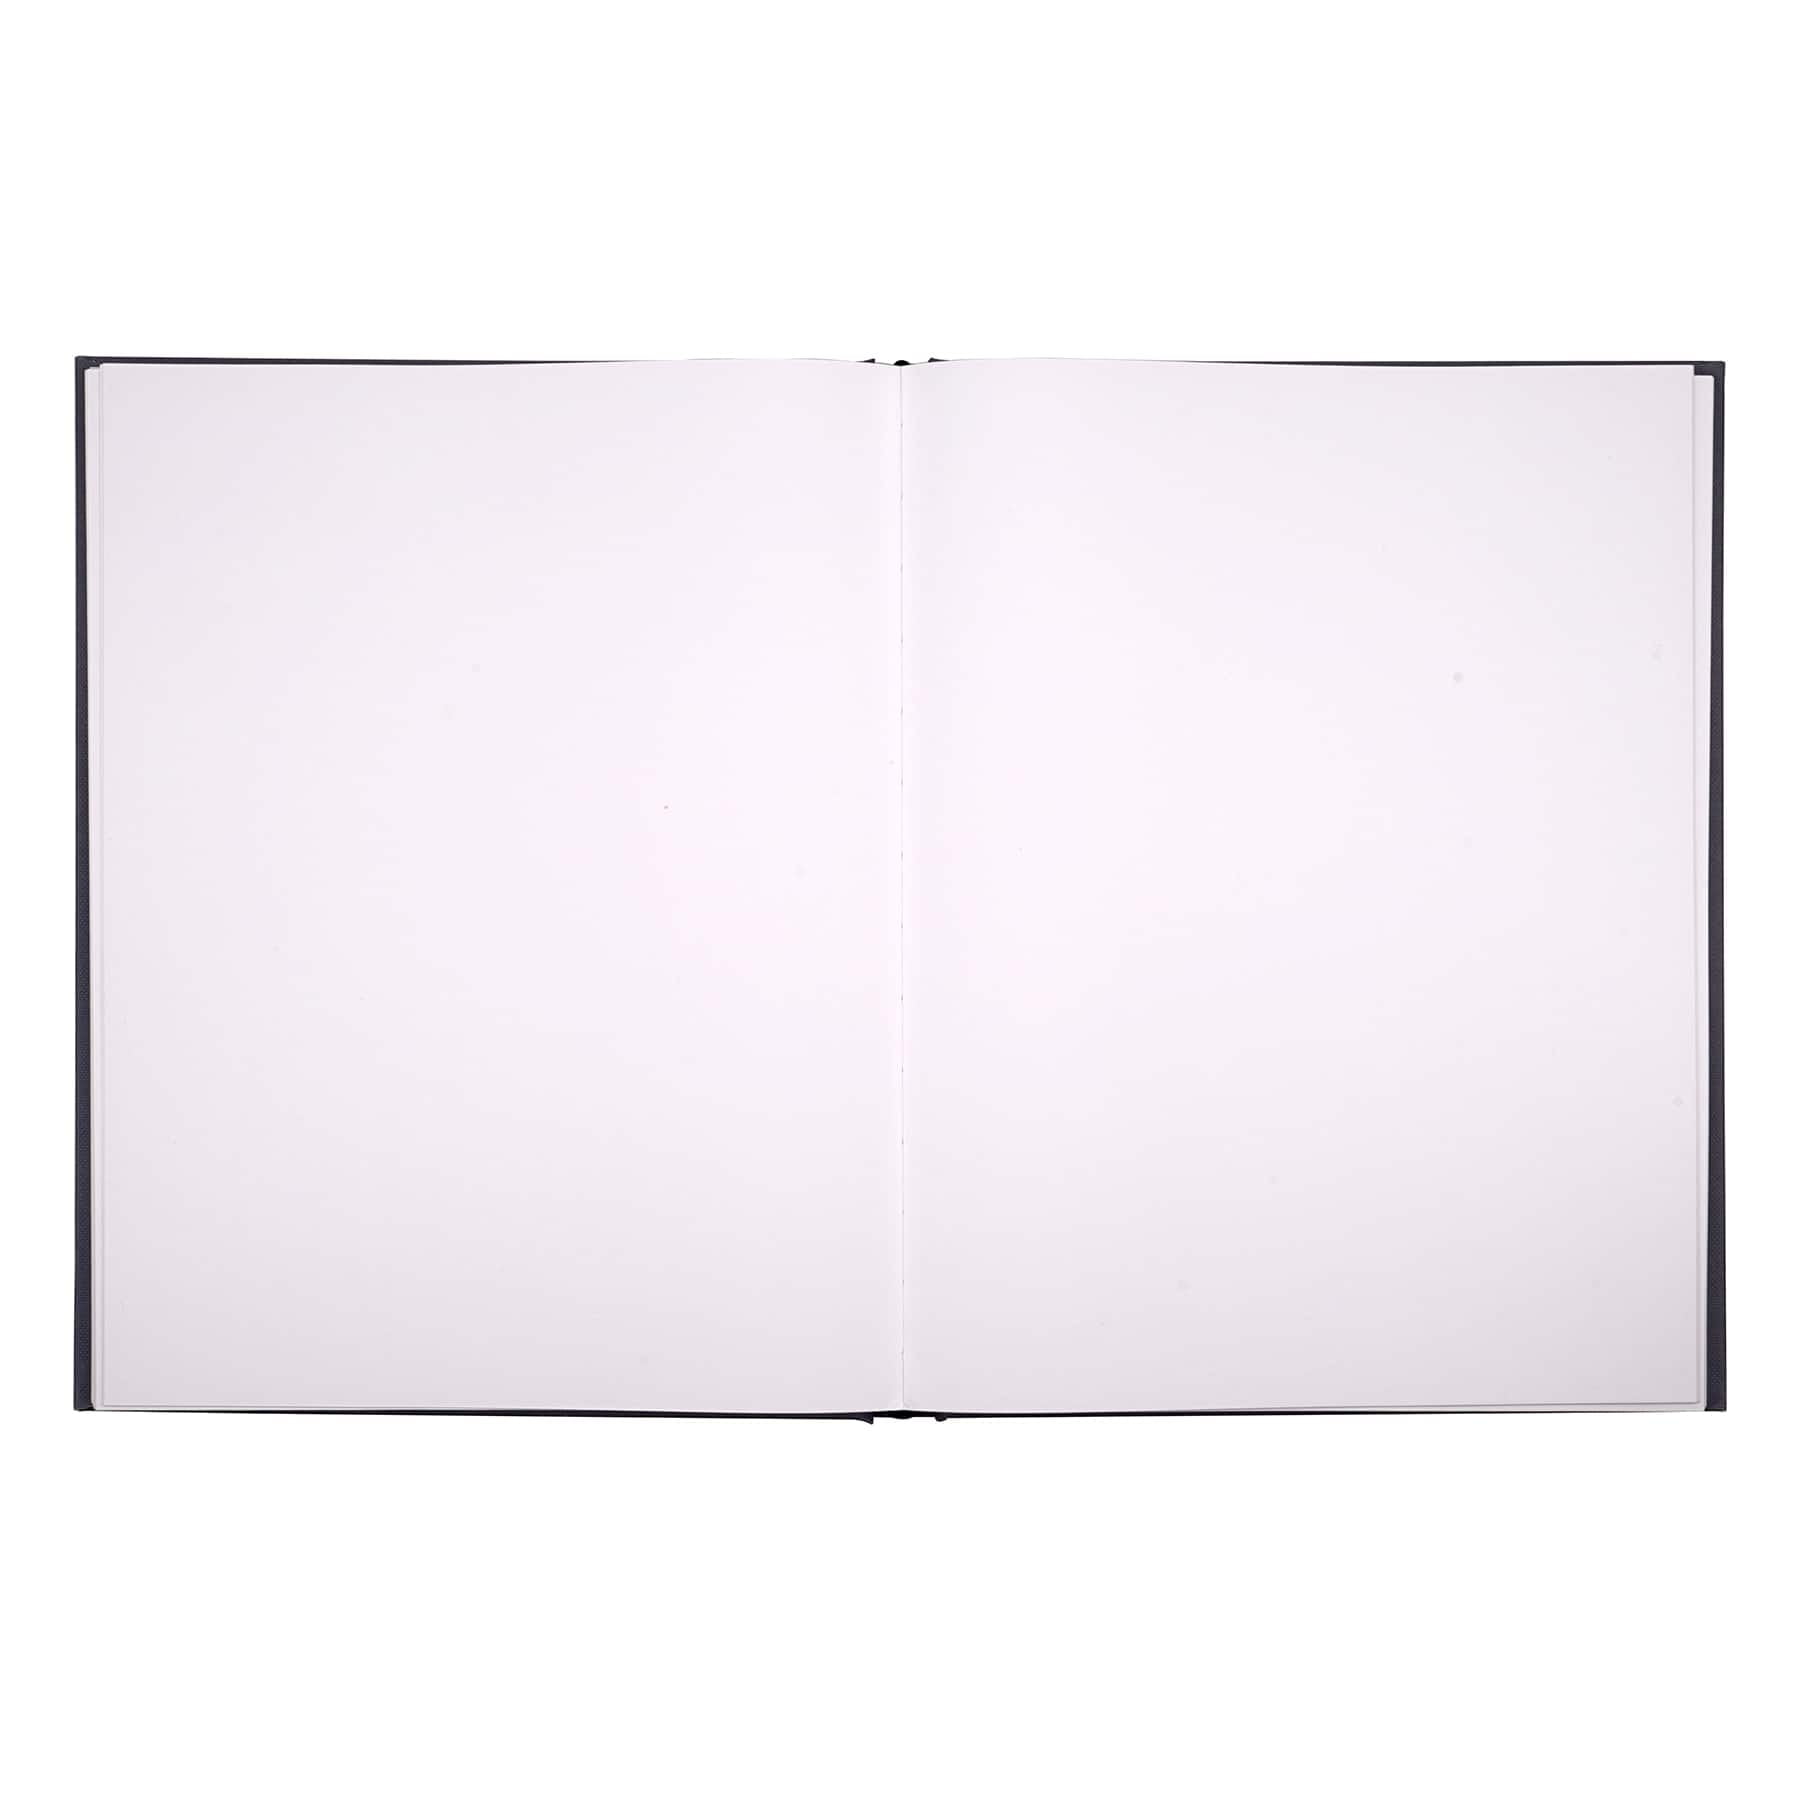 6 Pack: Sketch Pad by Artist's Loft, 8.5 inch x 11 inch, Size: 9.88 x 0.88 x 11, White